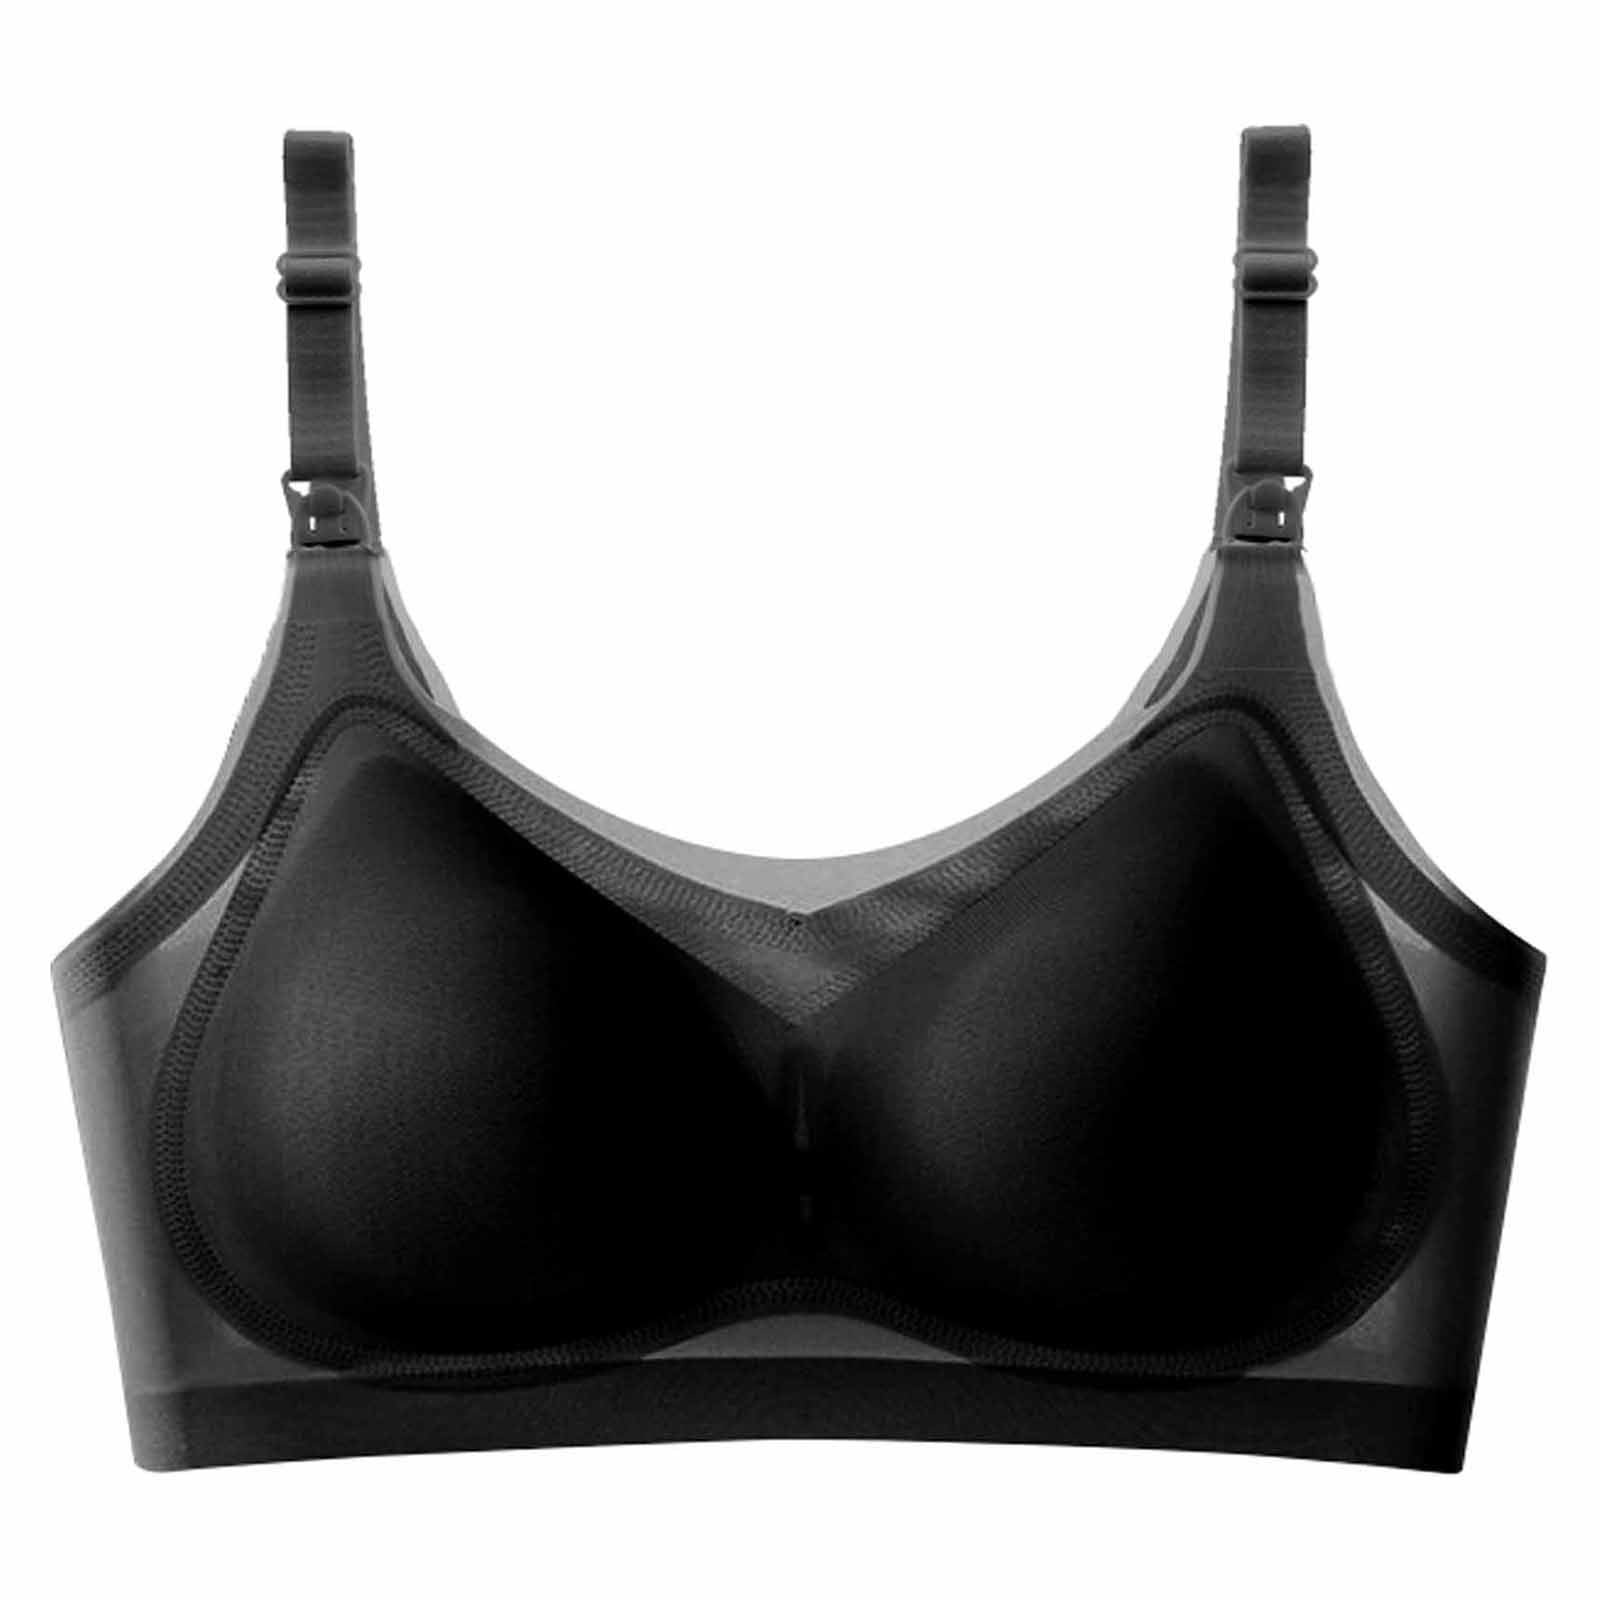 Penkiiy Womens Adhesive Bras Women's Silicone Invisible Bra Reusable Chest  Sticker Lifting Chest Anti-Bulging Black Bras 